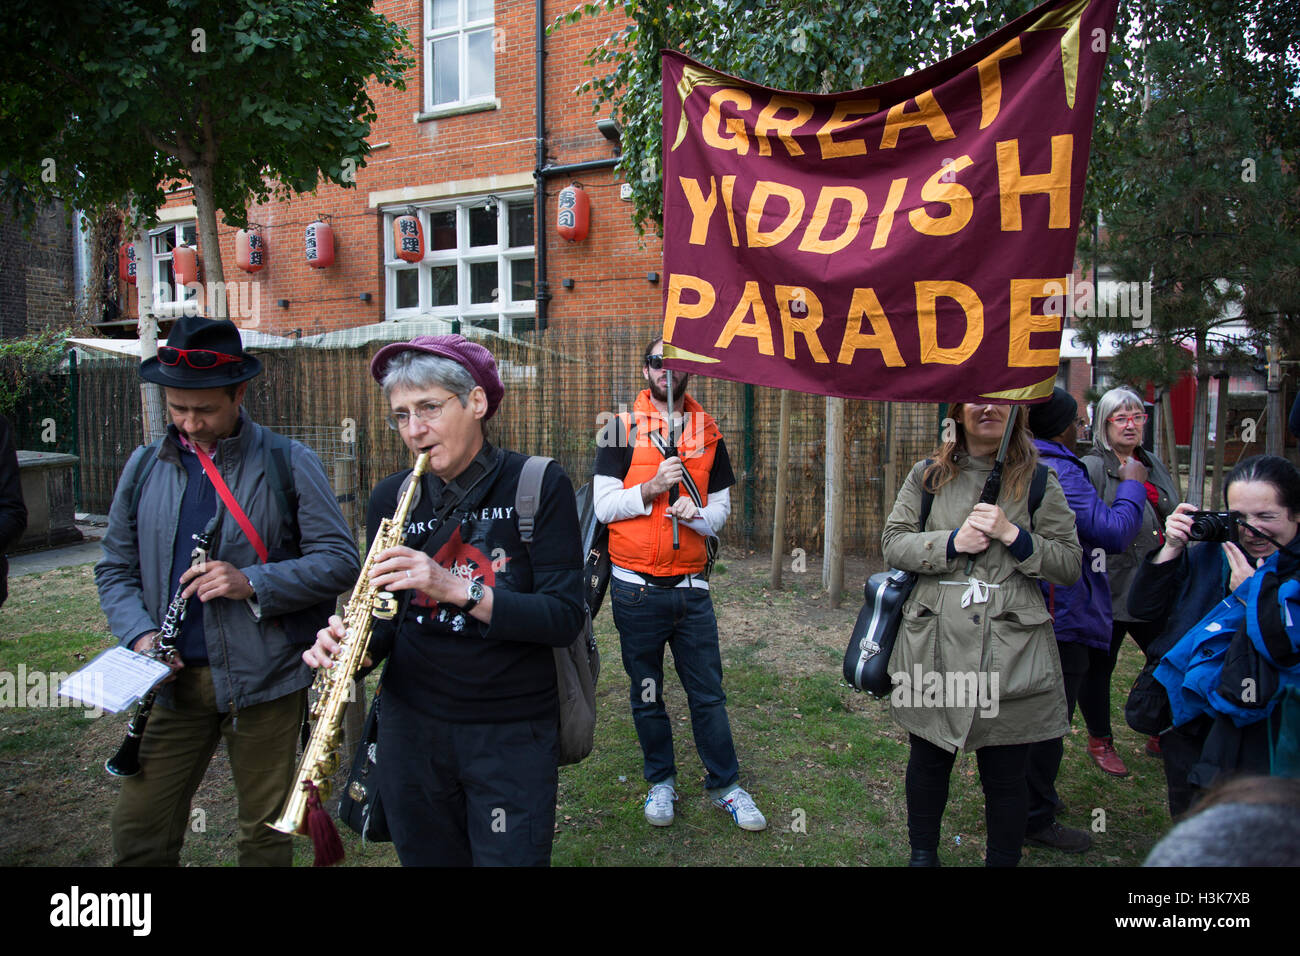 London,  UK. 9th October, 2016. Great Yiddish Parade band playing in Altab Ali Park during the Cable Street 80 march and rally through Whitechapel to mark the 80th anniversary of the Battle of Cable Street on 9th October 2016 in London, United Kingdom. The demonstration marks the day when tens of thousands of people across the East End, joined by others who came to support them, prevented Oswald Mosley’s British Union of Fascists invading the Jewish areas of the East End. Credit:  Michael Kemp/Alamy Live News Stock Photo